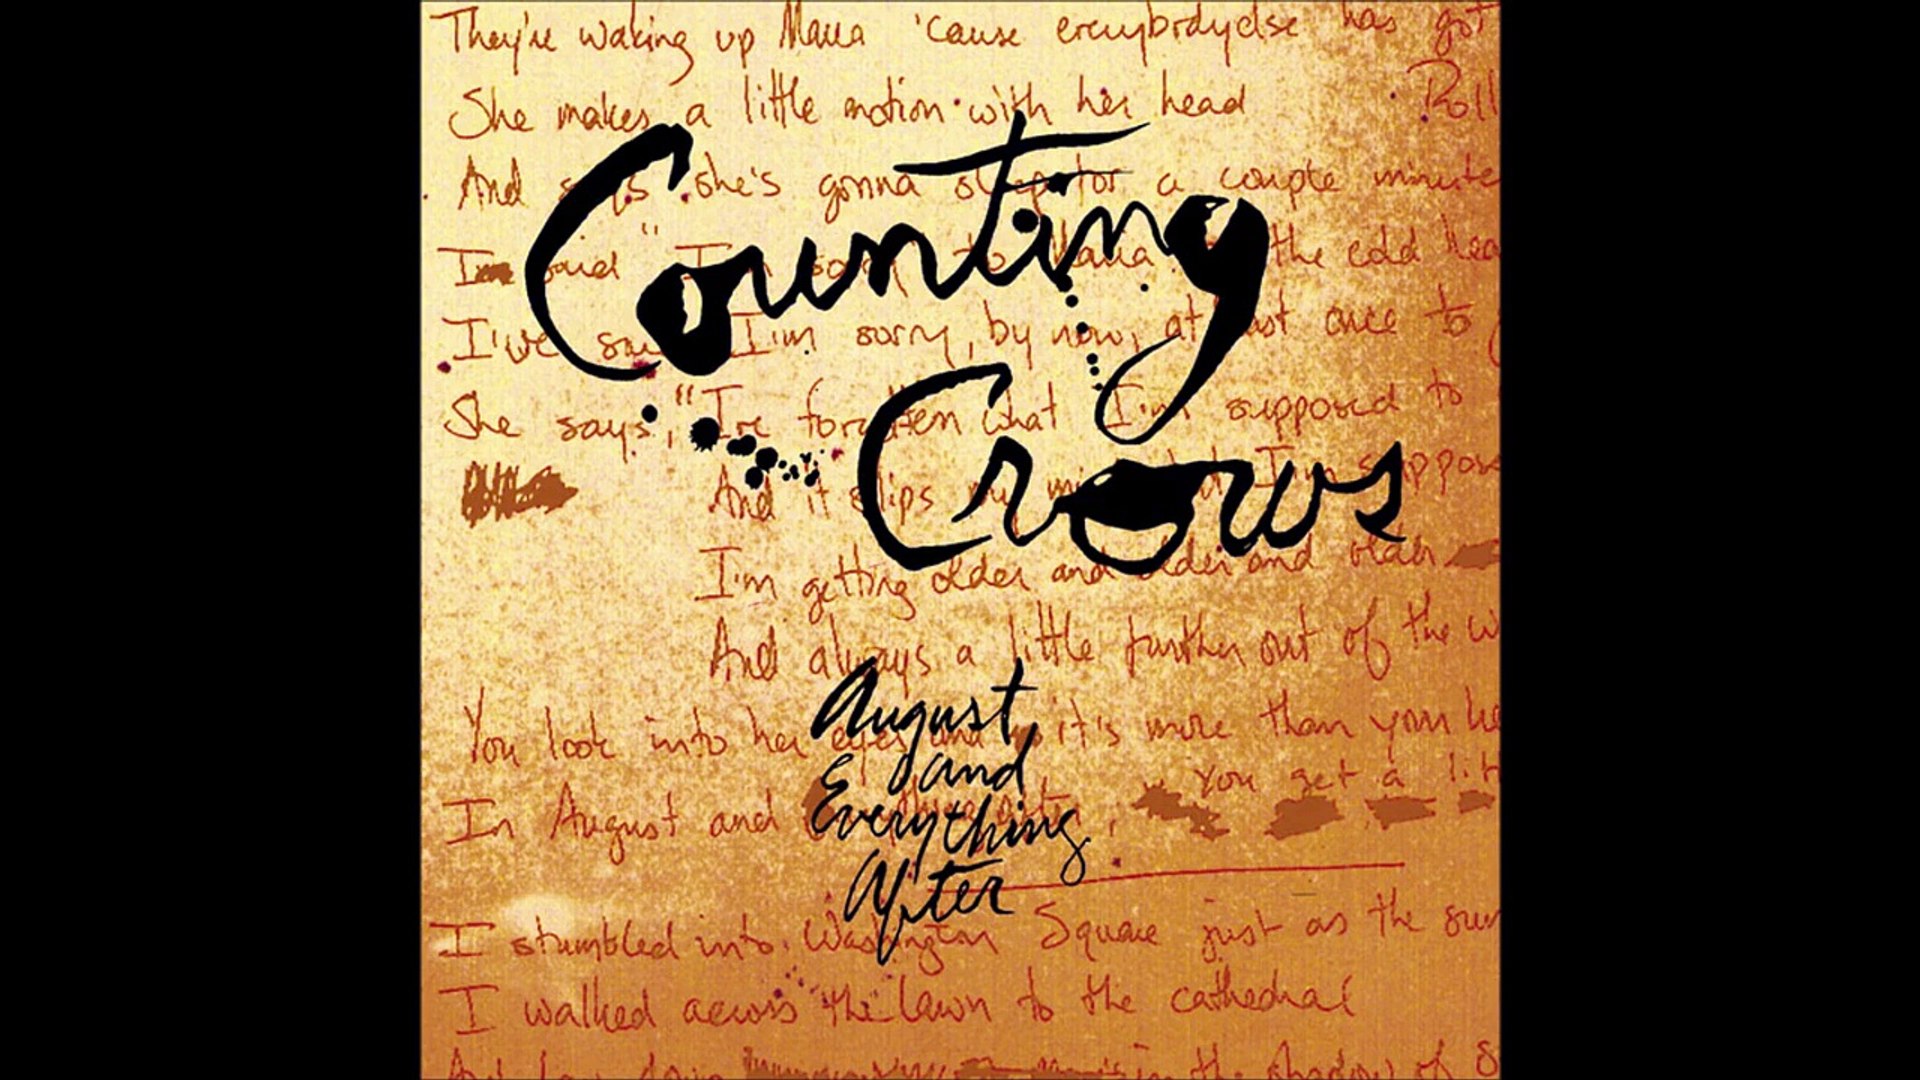 Counting Crows - Anna Begins